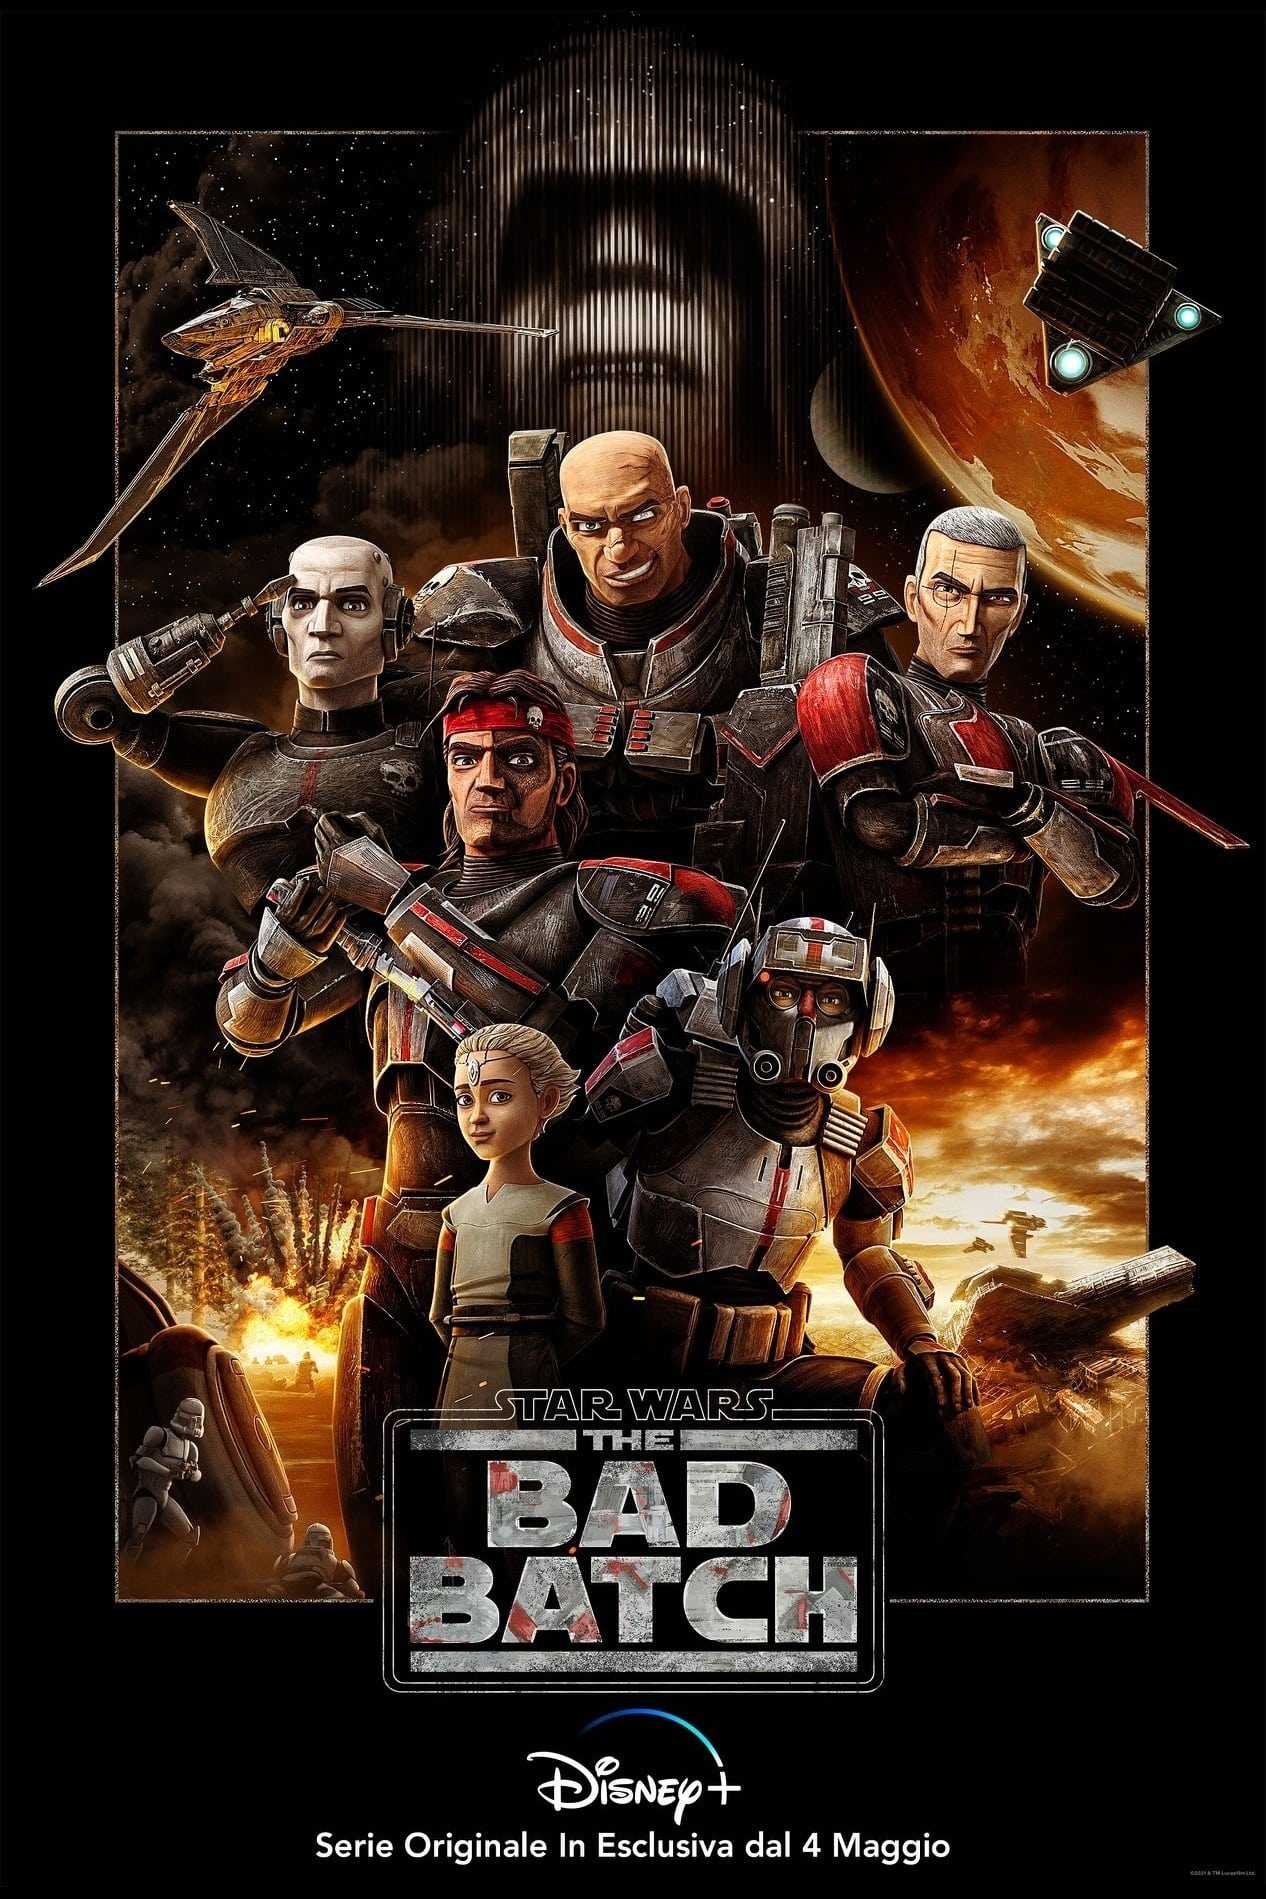 Star Wars: The Bad Batch in streaming